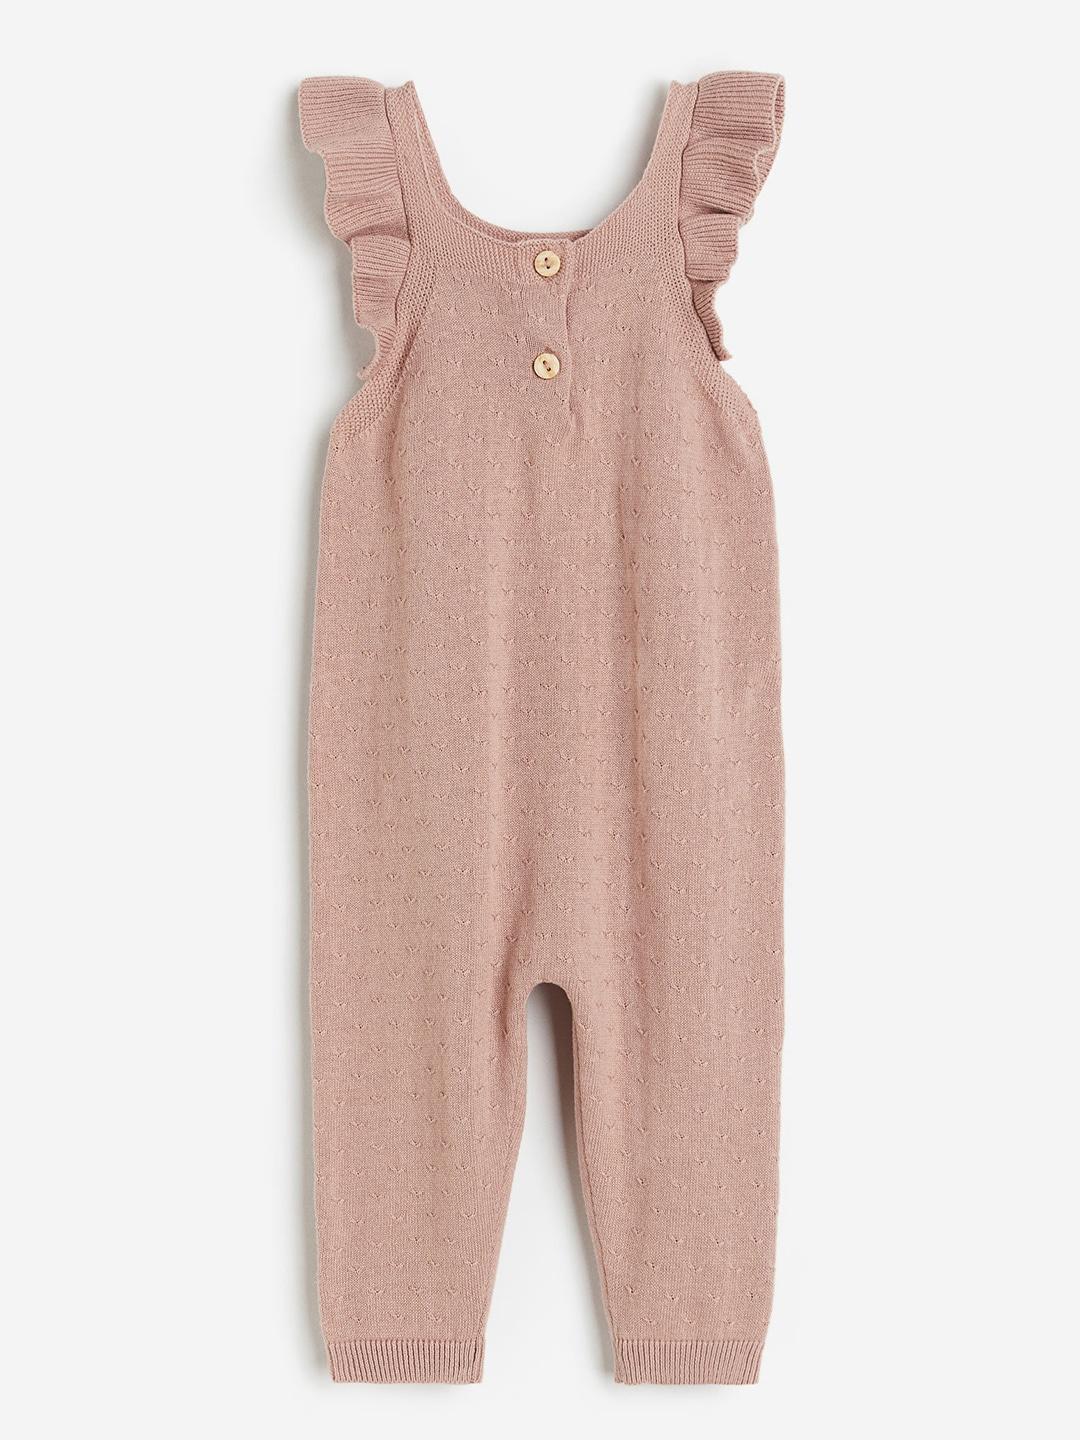 H&M Girls Pure Cotton Knitted Romper Suit